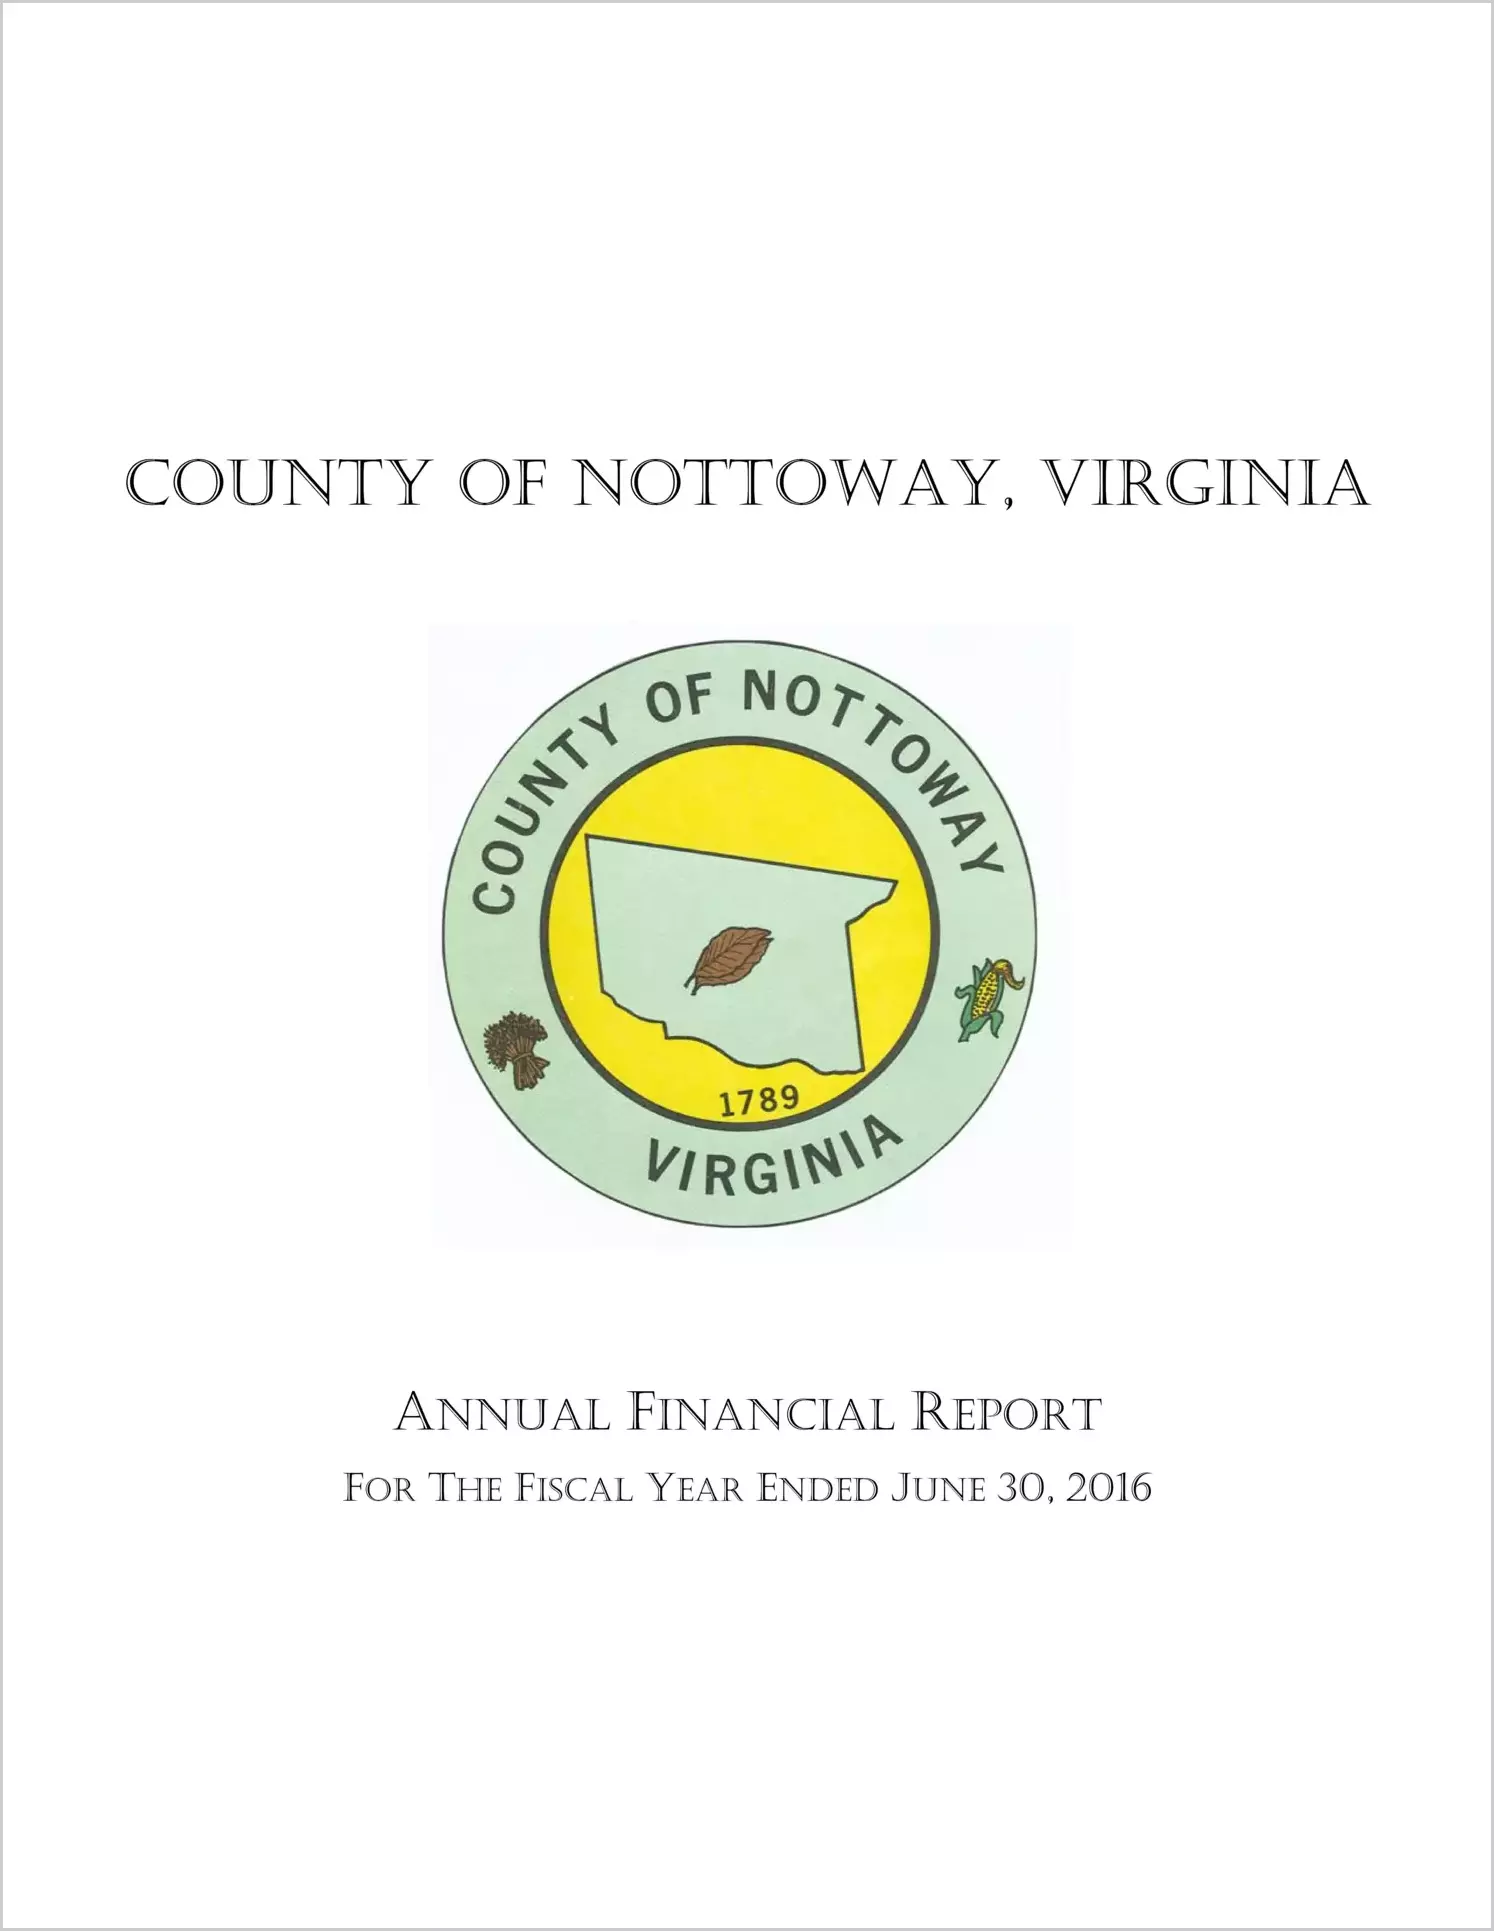 2016 Annual Financial Report for County of Nottoway